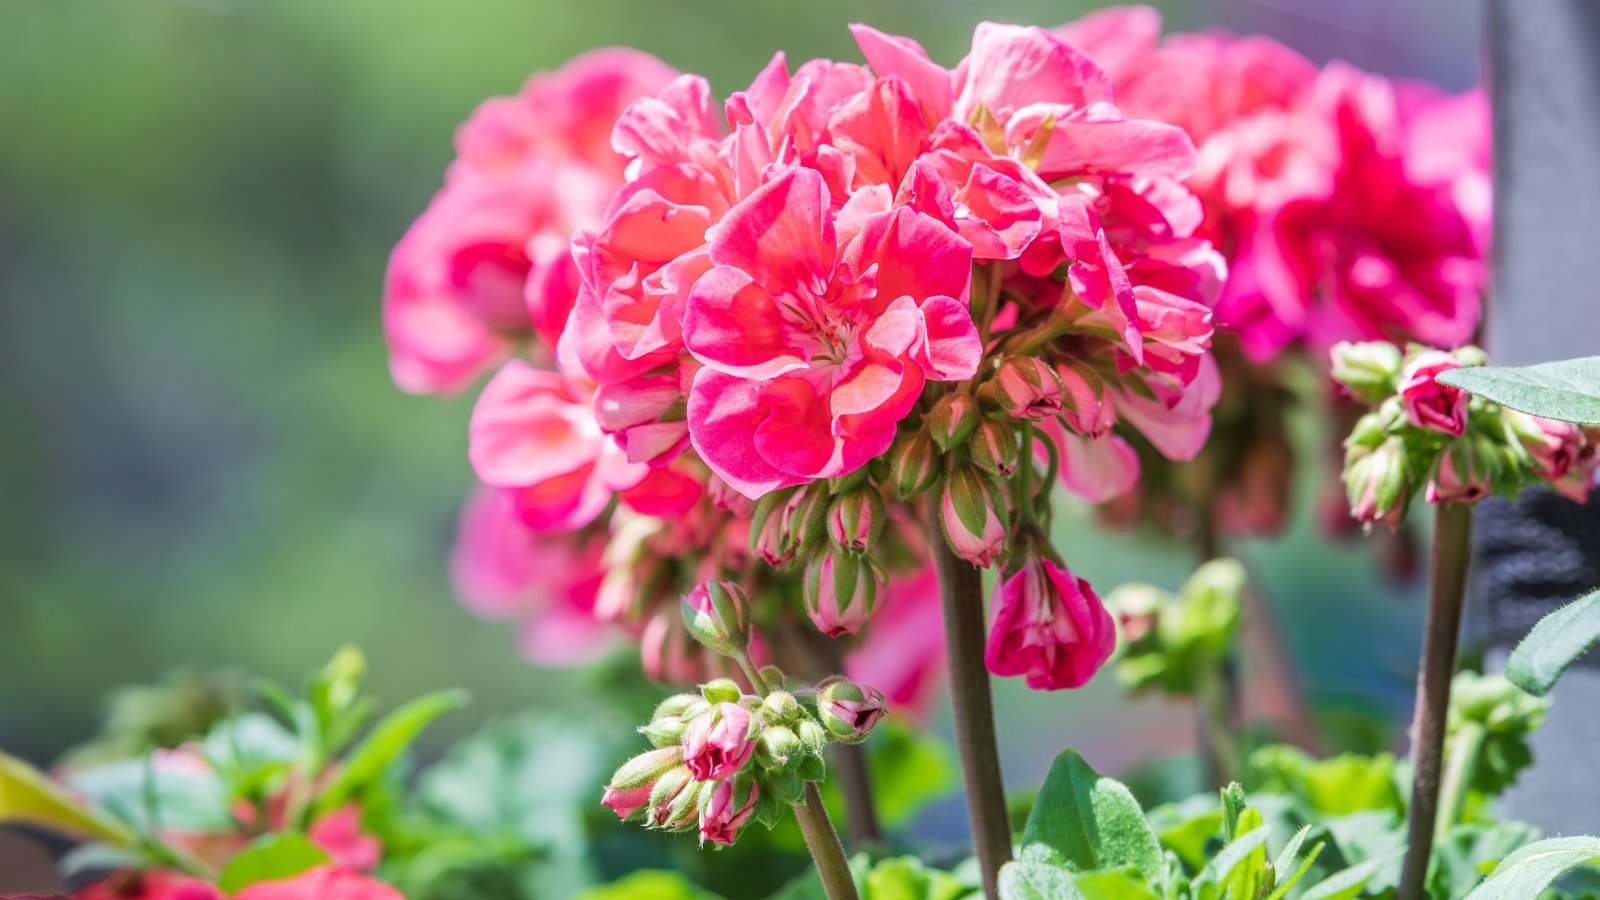 Geraniums Pelargonium exhibits succulent stems and rounded, lobed leaves, accompanied by clusters of five-petaled flowers of bright pink color.